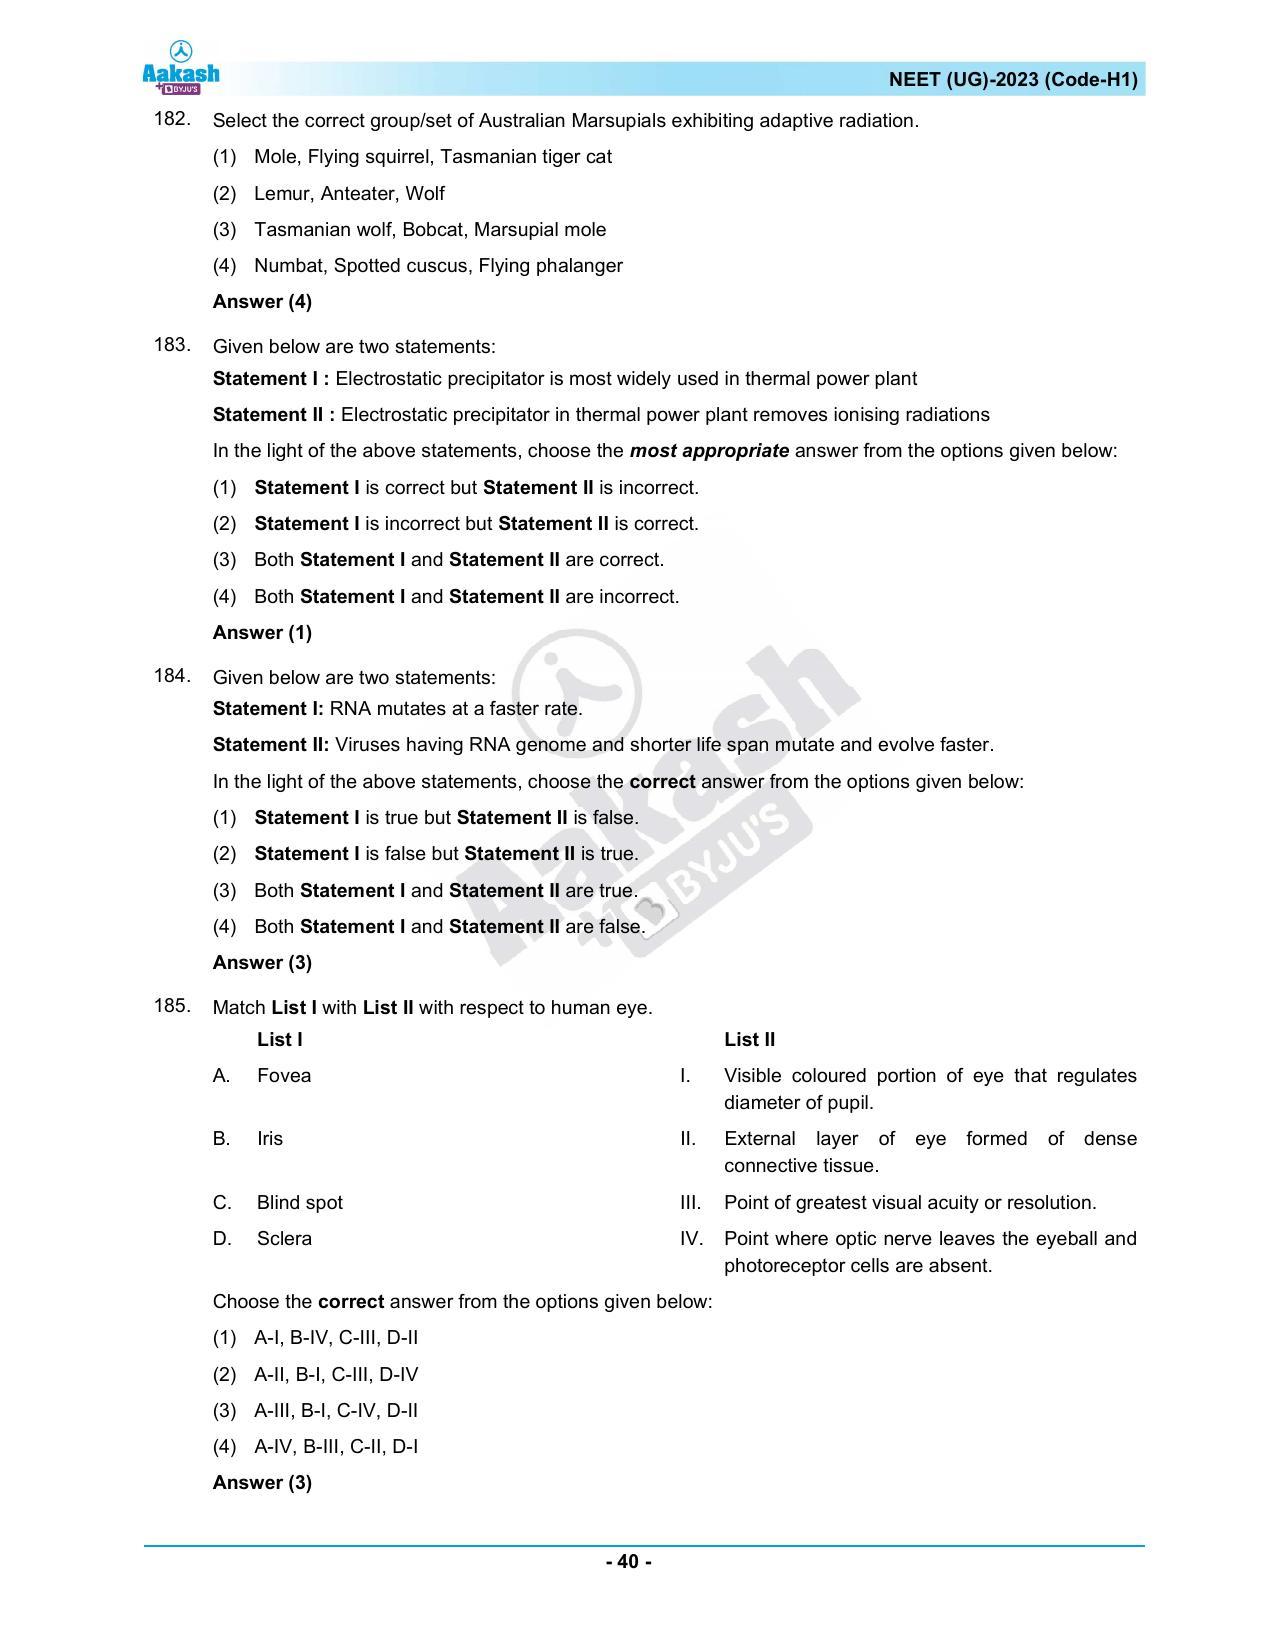 NEET 2023 Question Paper H1 - Page 40